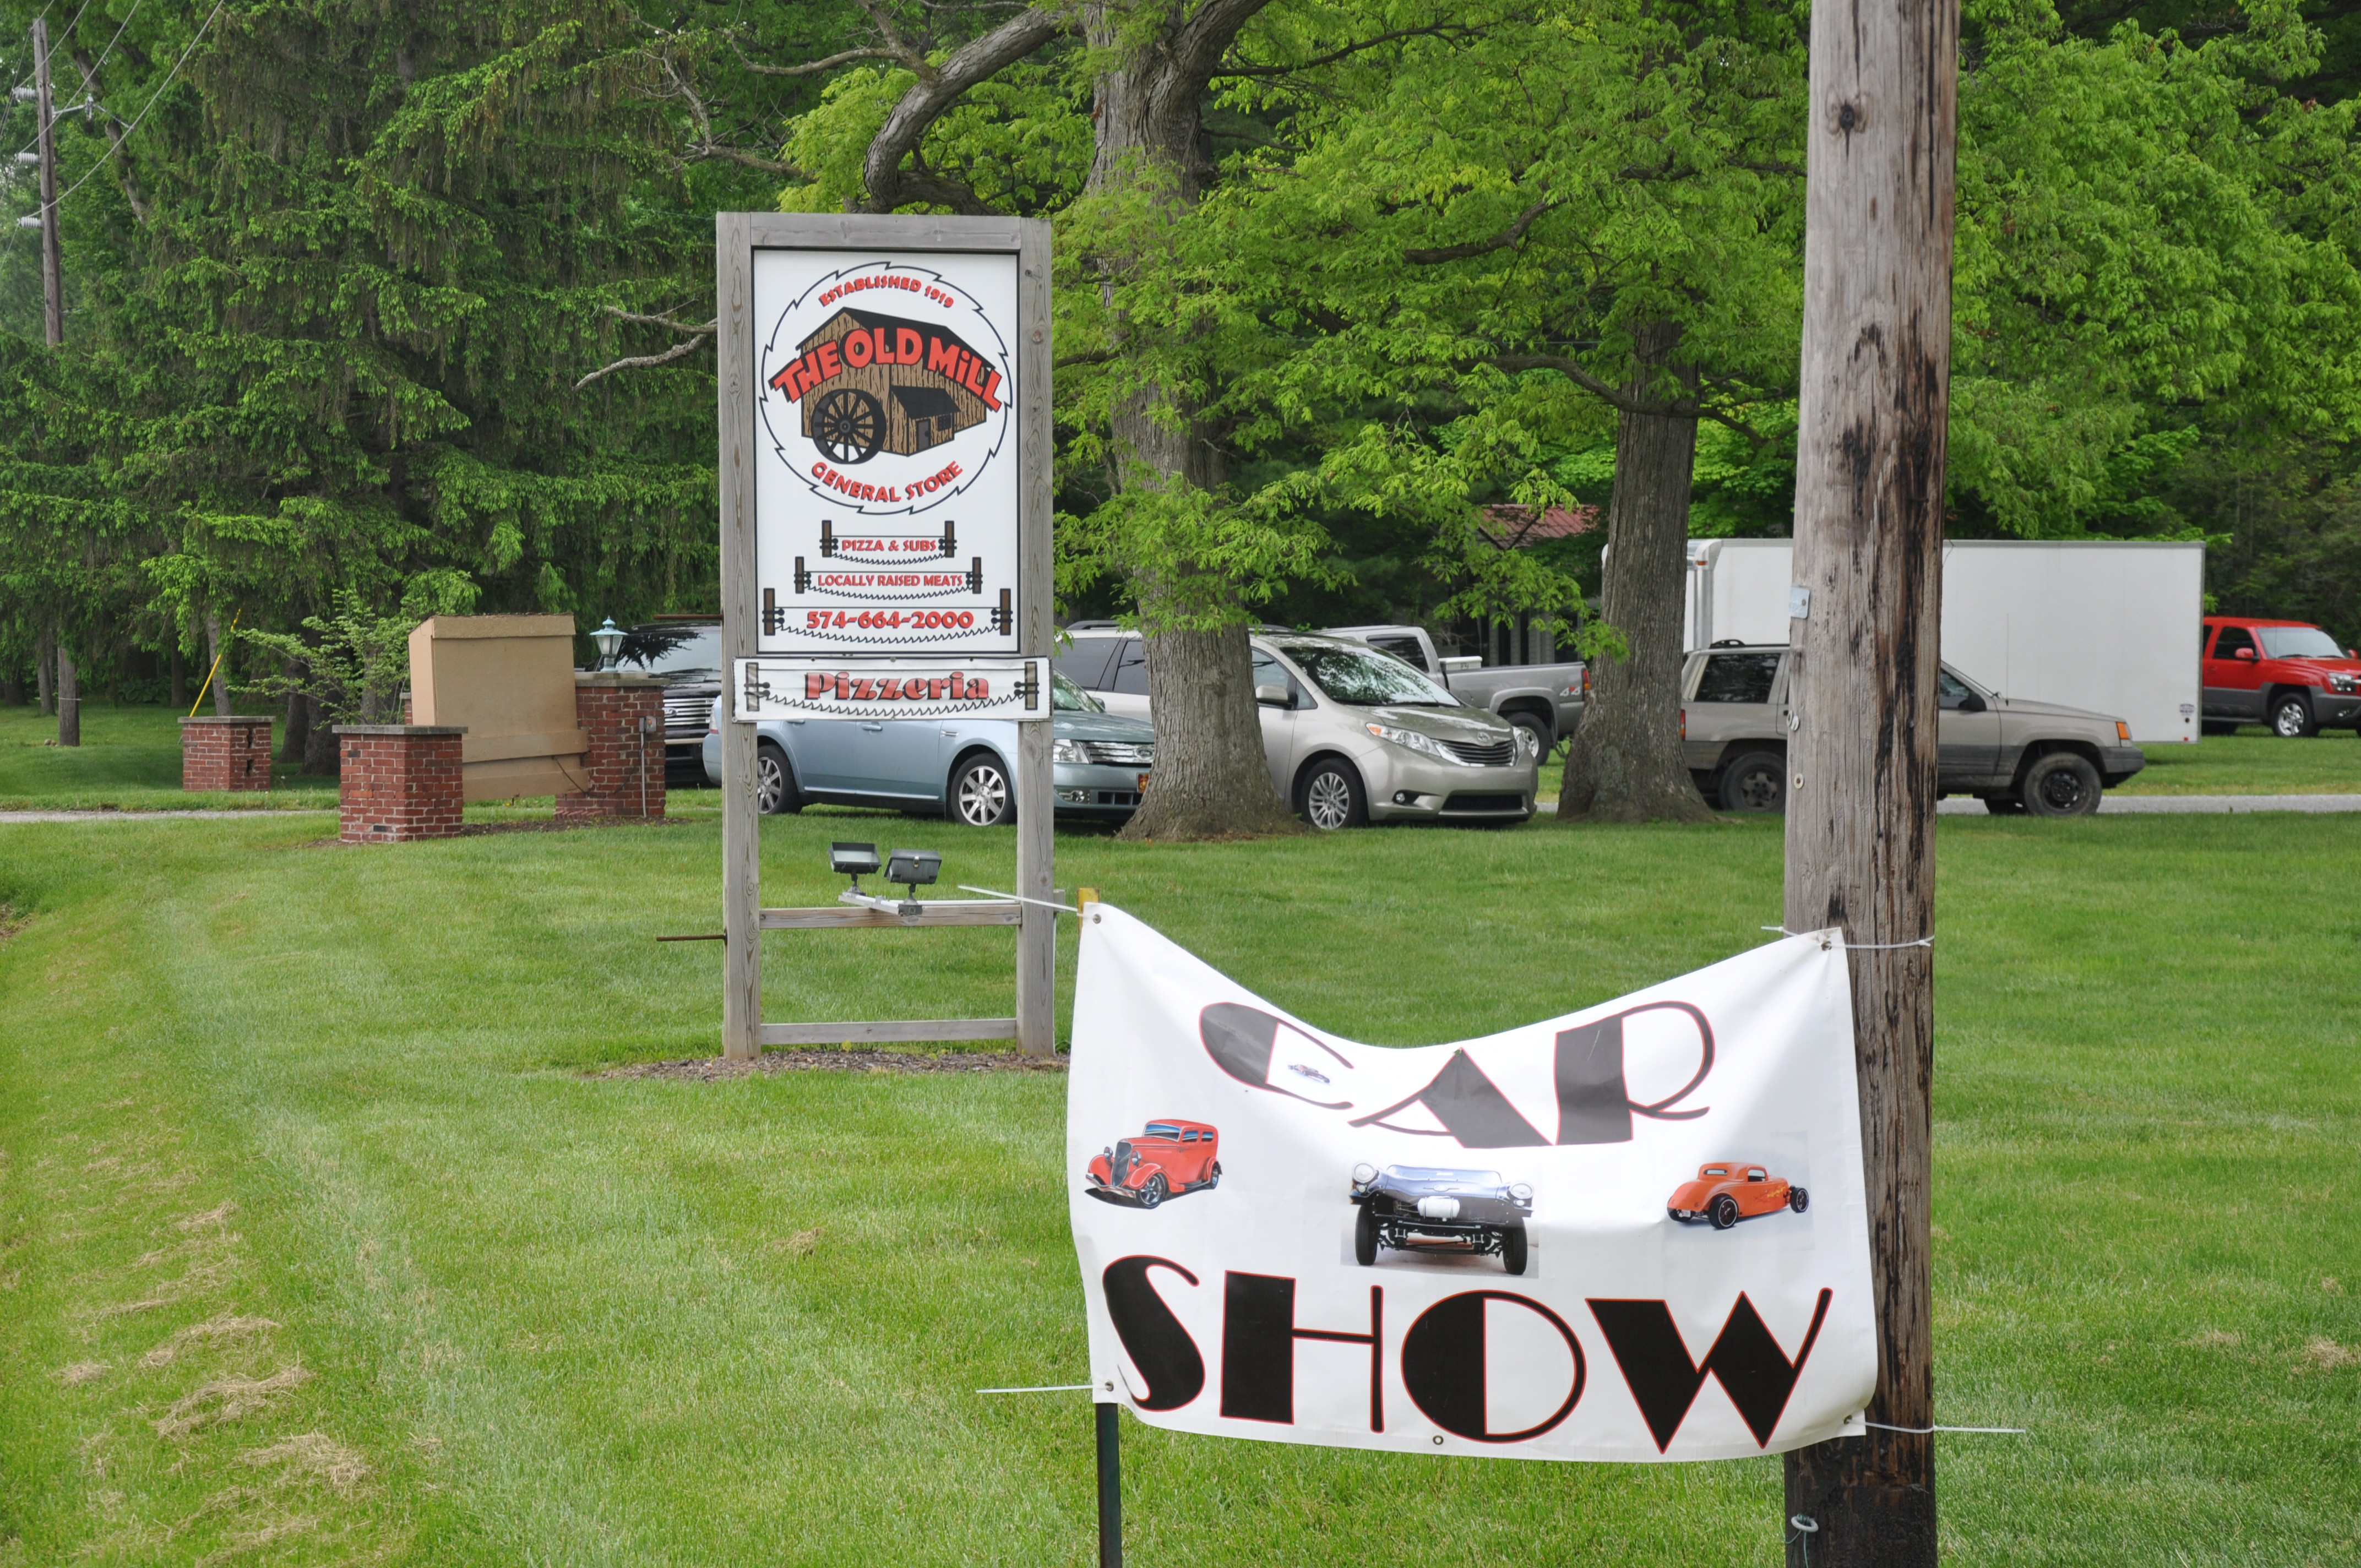 Thumbnail for the post titled: The Old Mill hosts 4th Annual Car Show